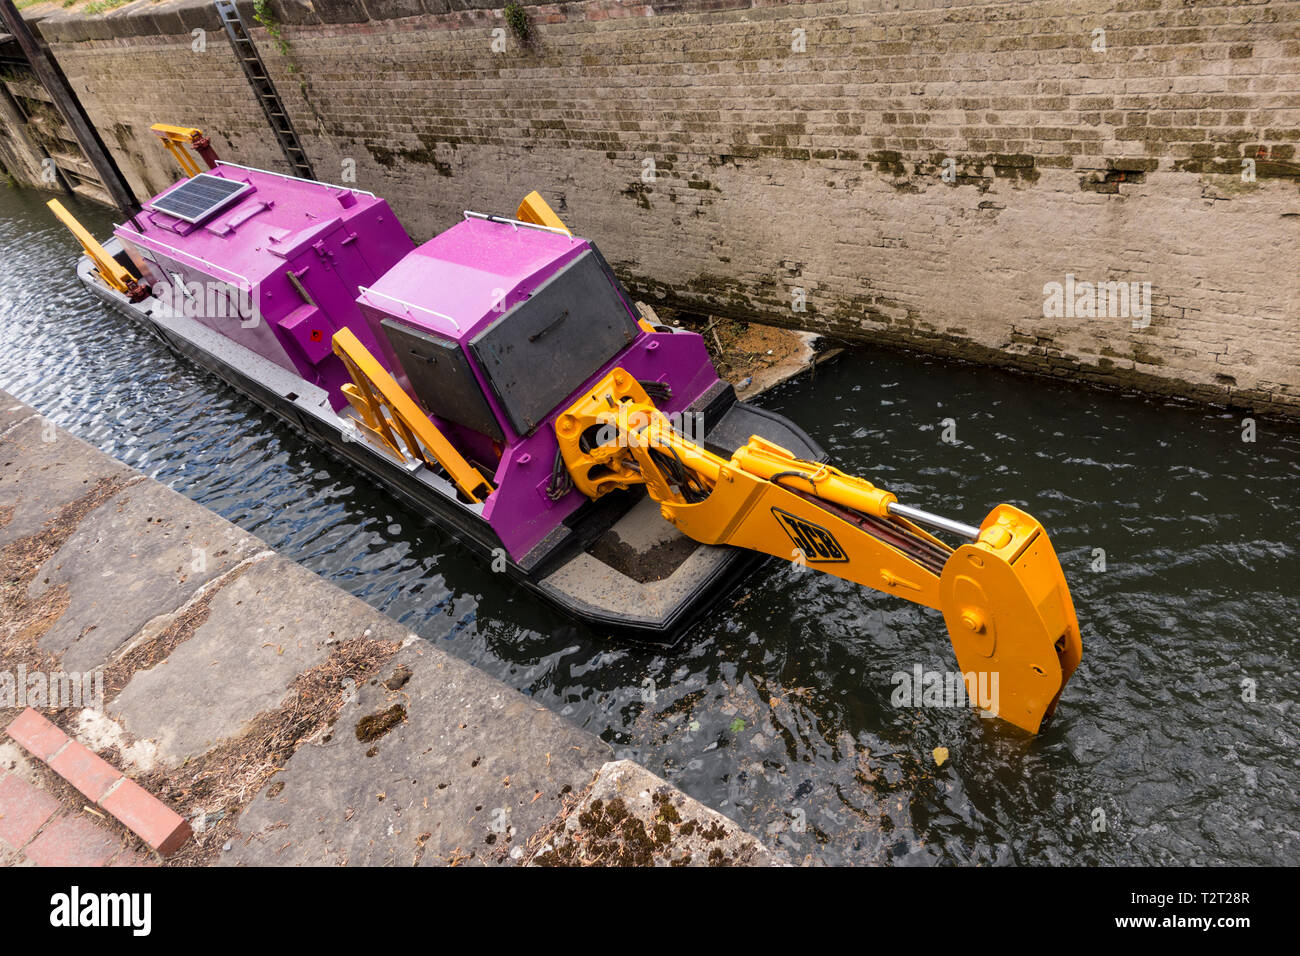 Specially adopted JCB digger in Stroudwater Navigation canal, Stroud, Gloucestershire, UK Stock Photo